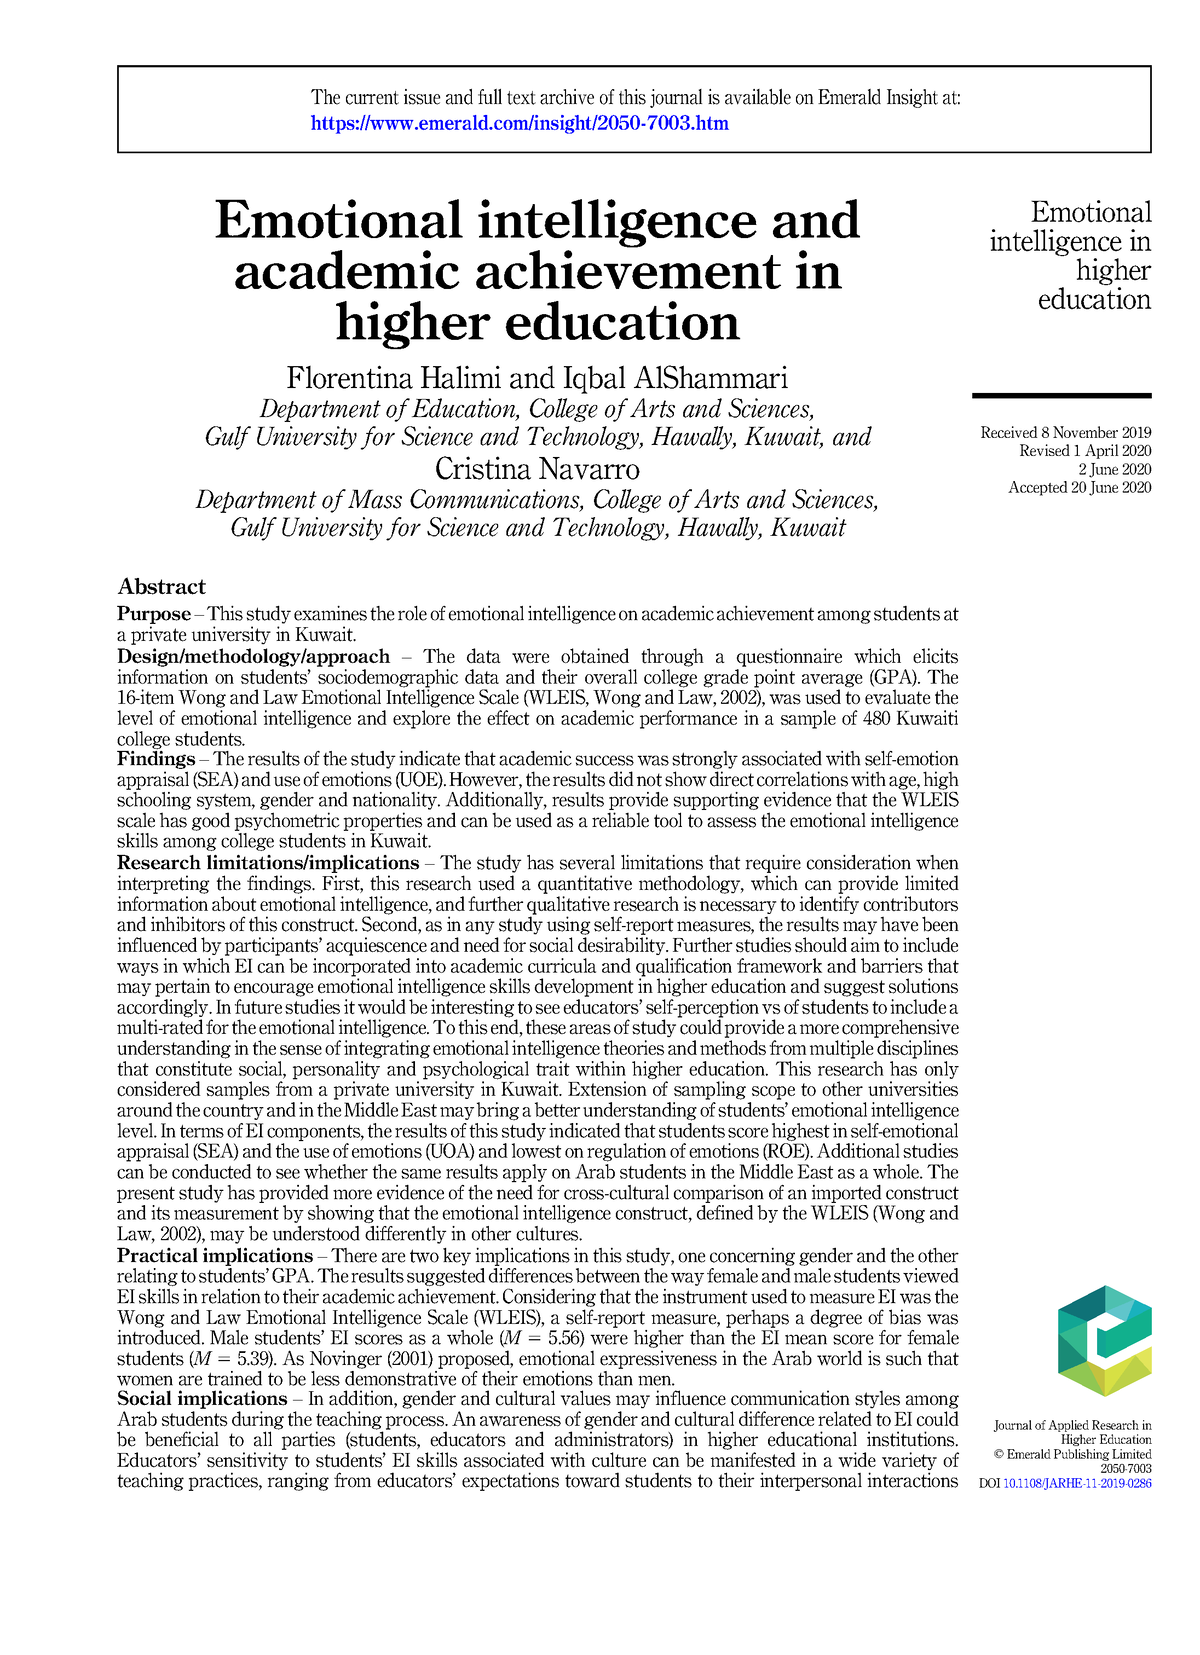 literature review on emotional intelligence and academic achievement